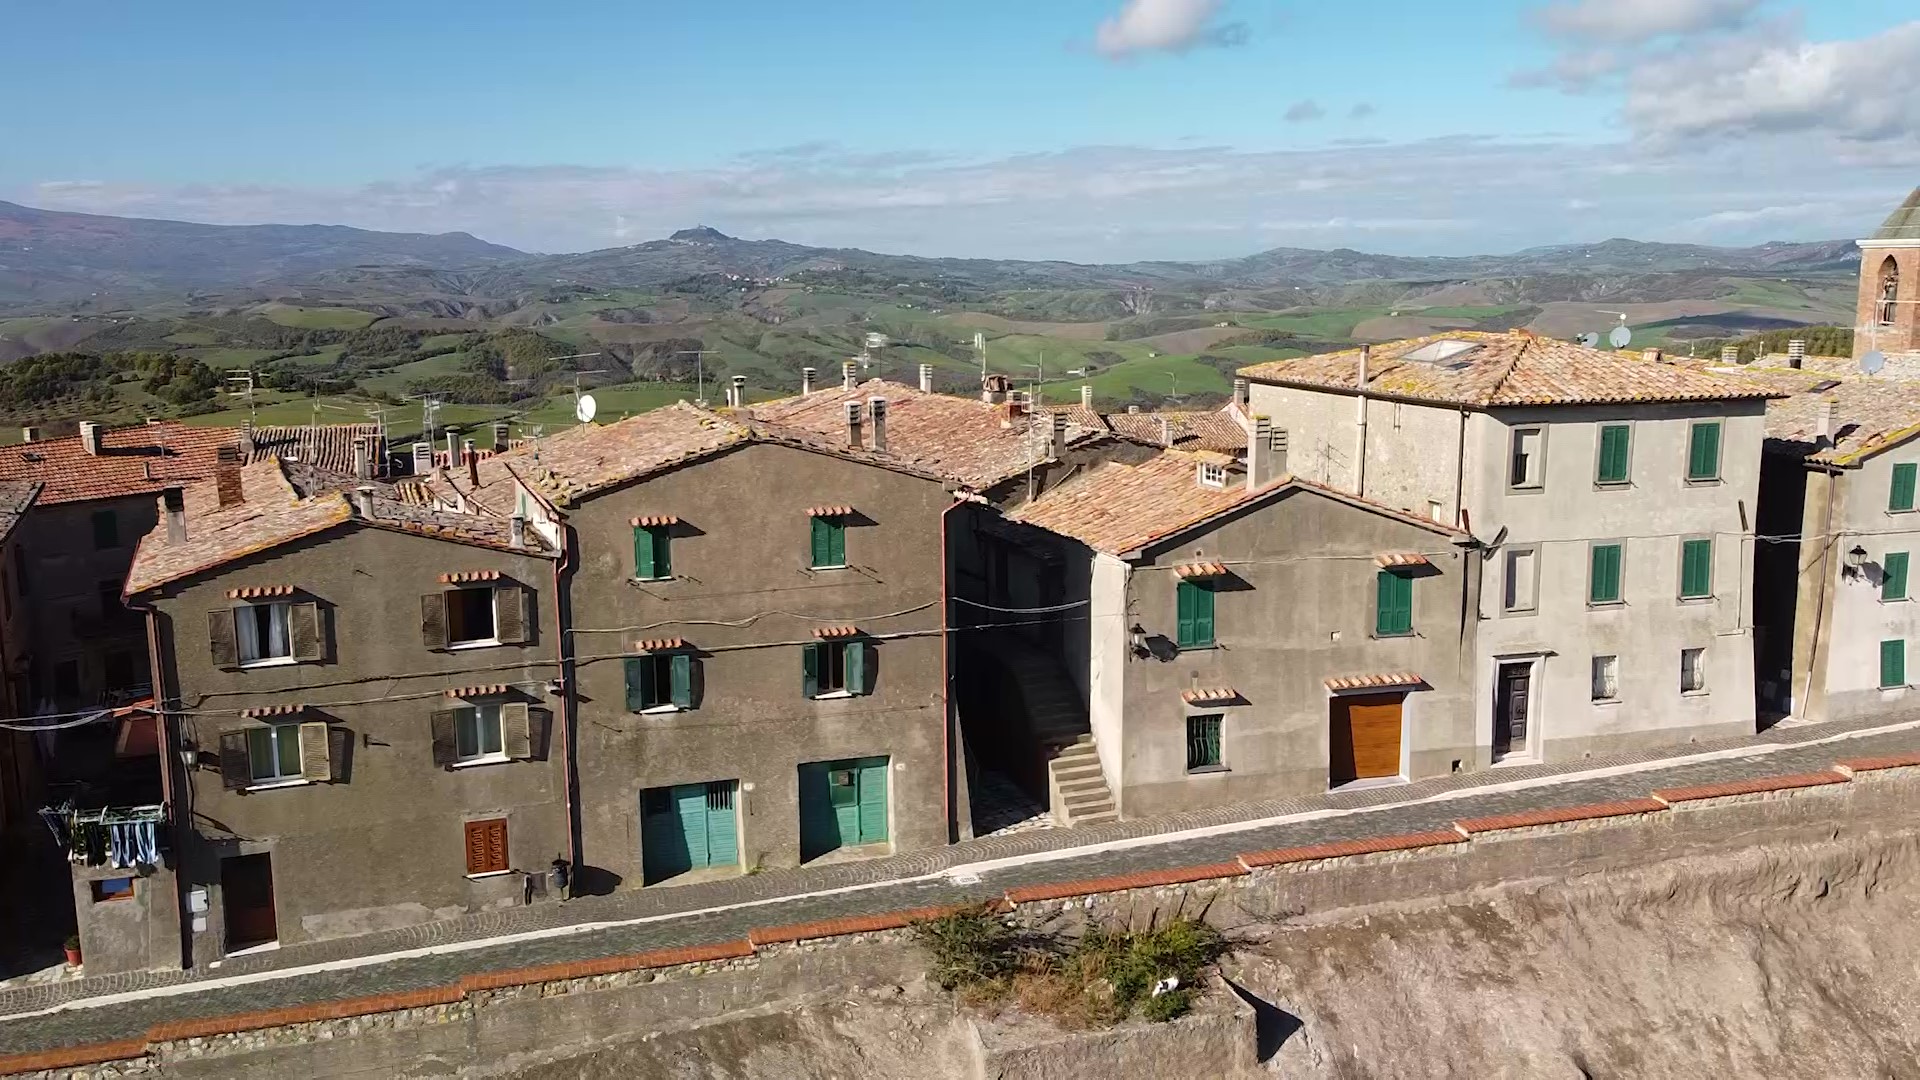 Trevinano is down to just 142 inhabitants, but hopes to remain viable with EU help. CGTN